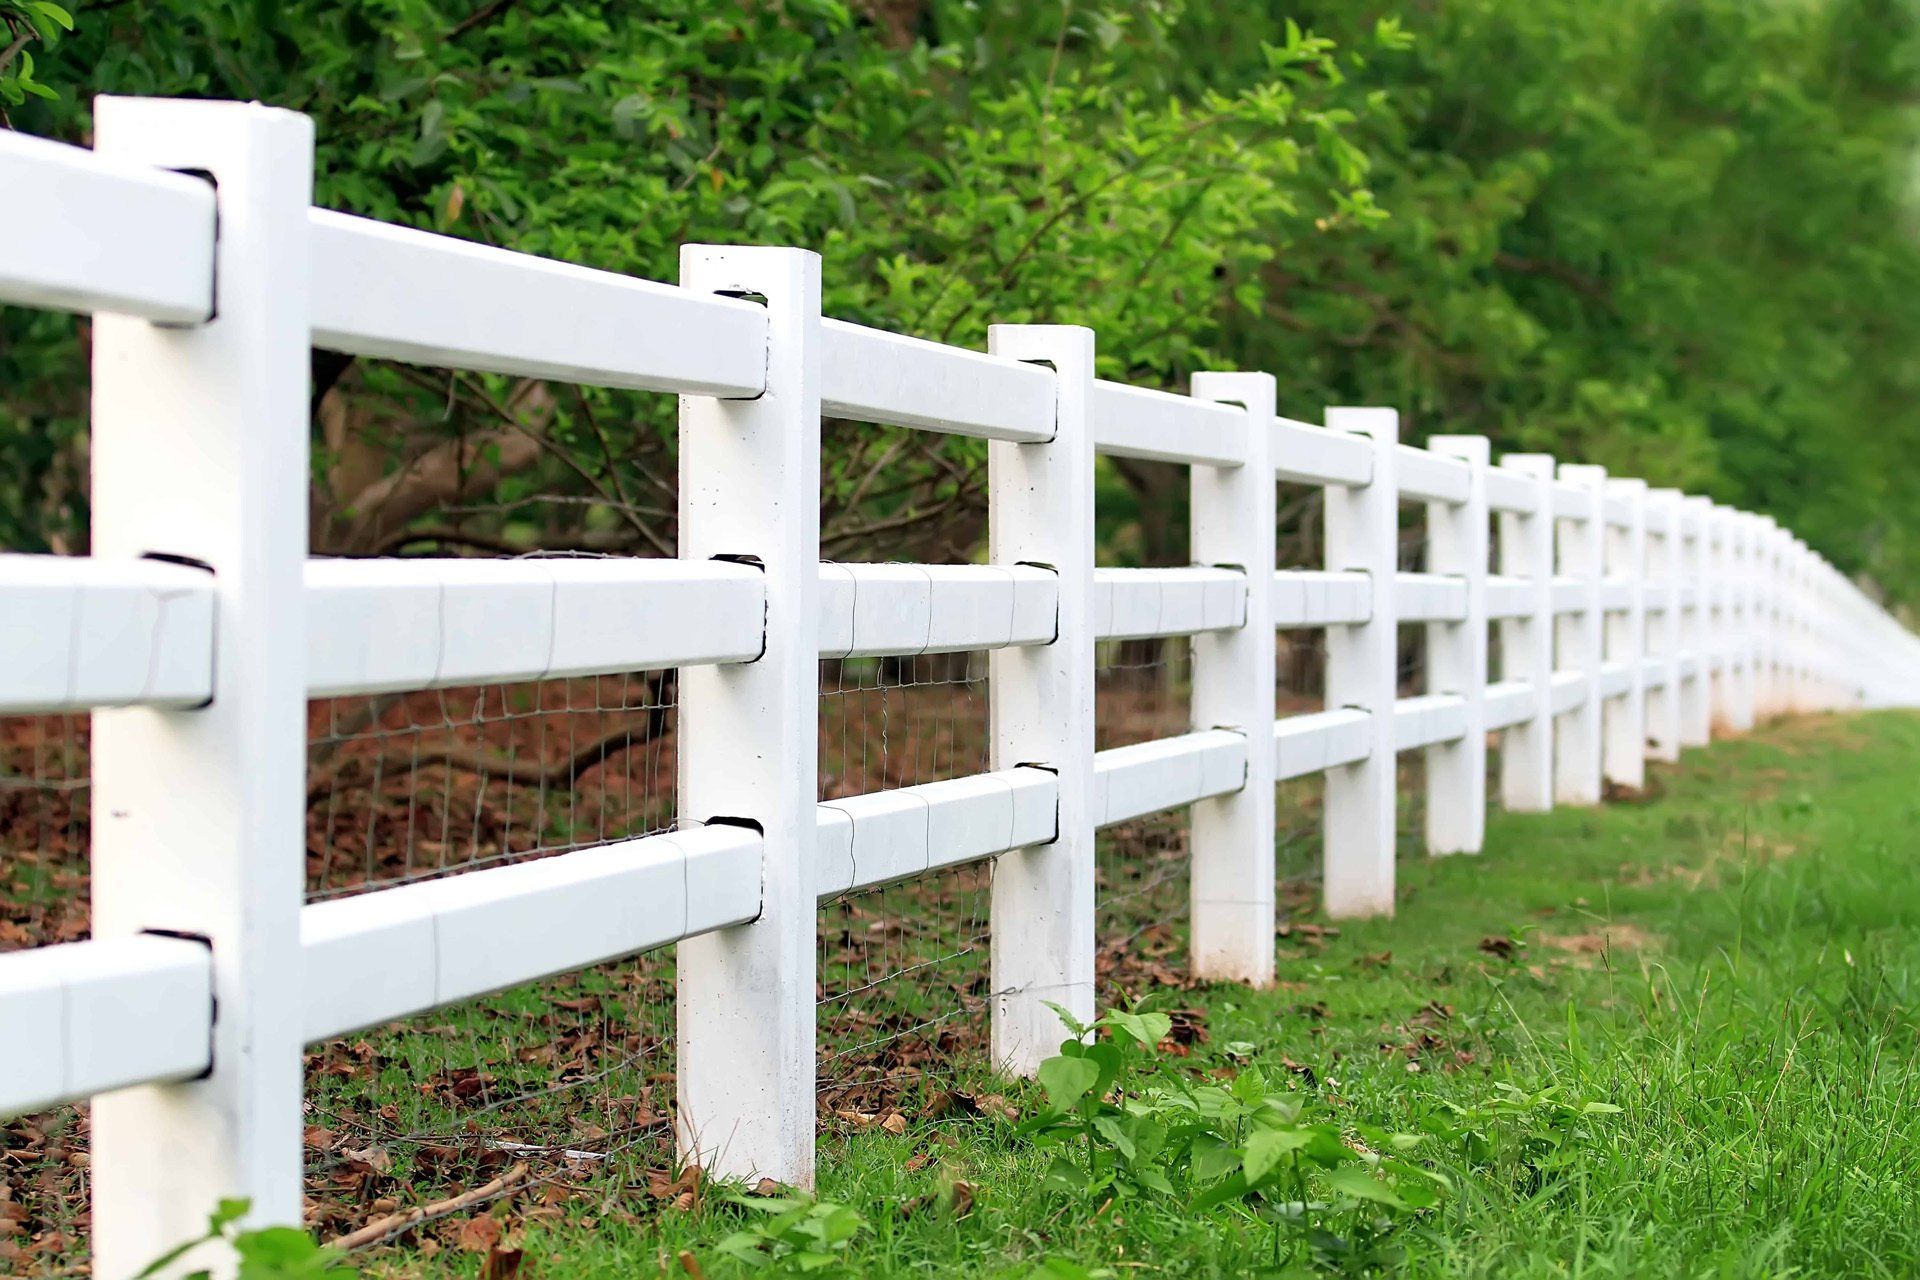 Vinyl fence is strong and flexible